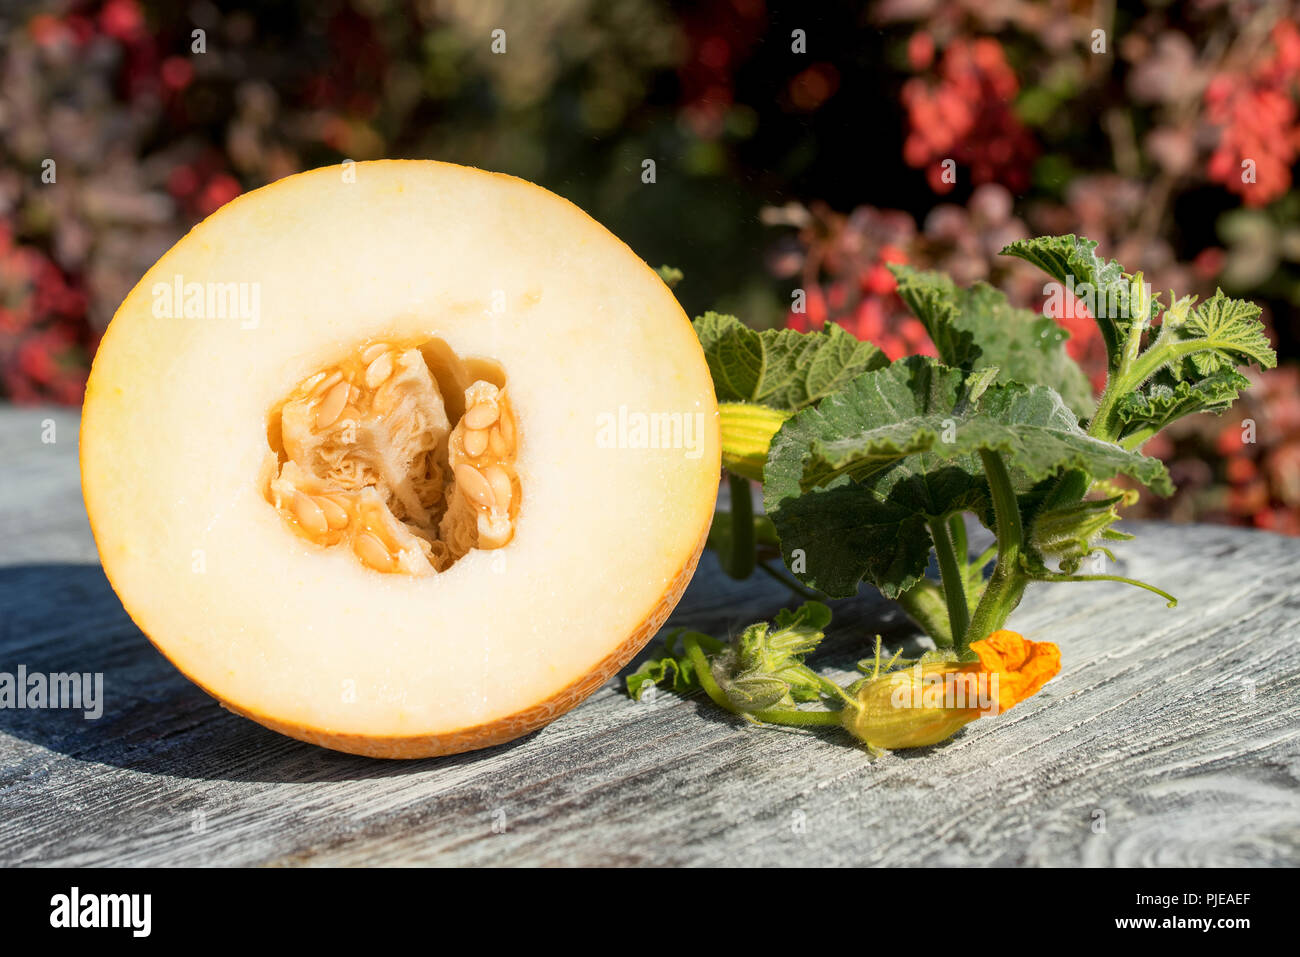 Half of melon on wooden table outdoors Stock Photo